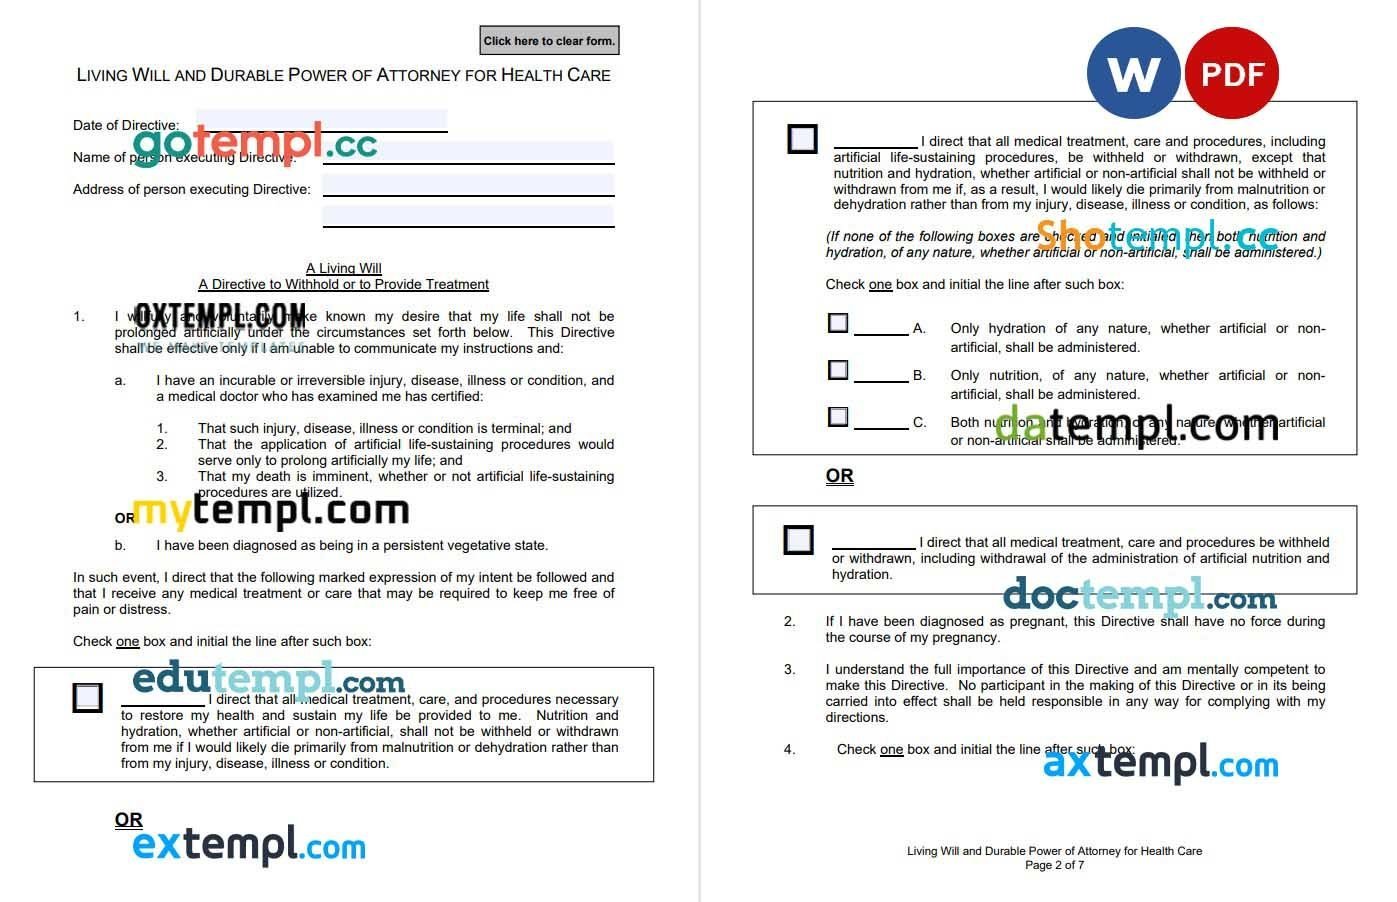 Singapore work permit card PSD template, with fonts